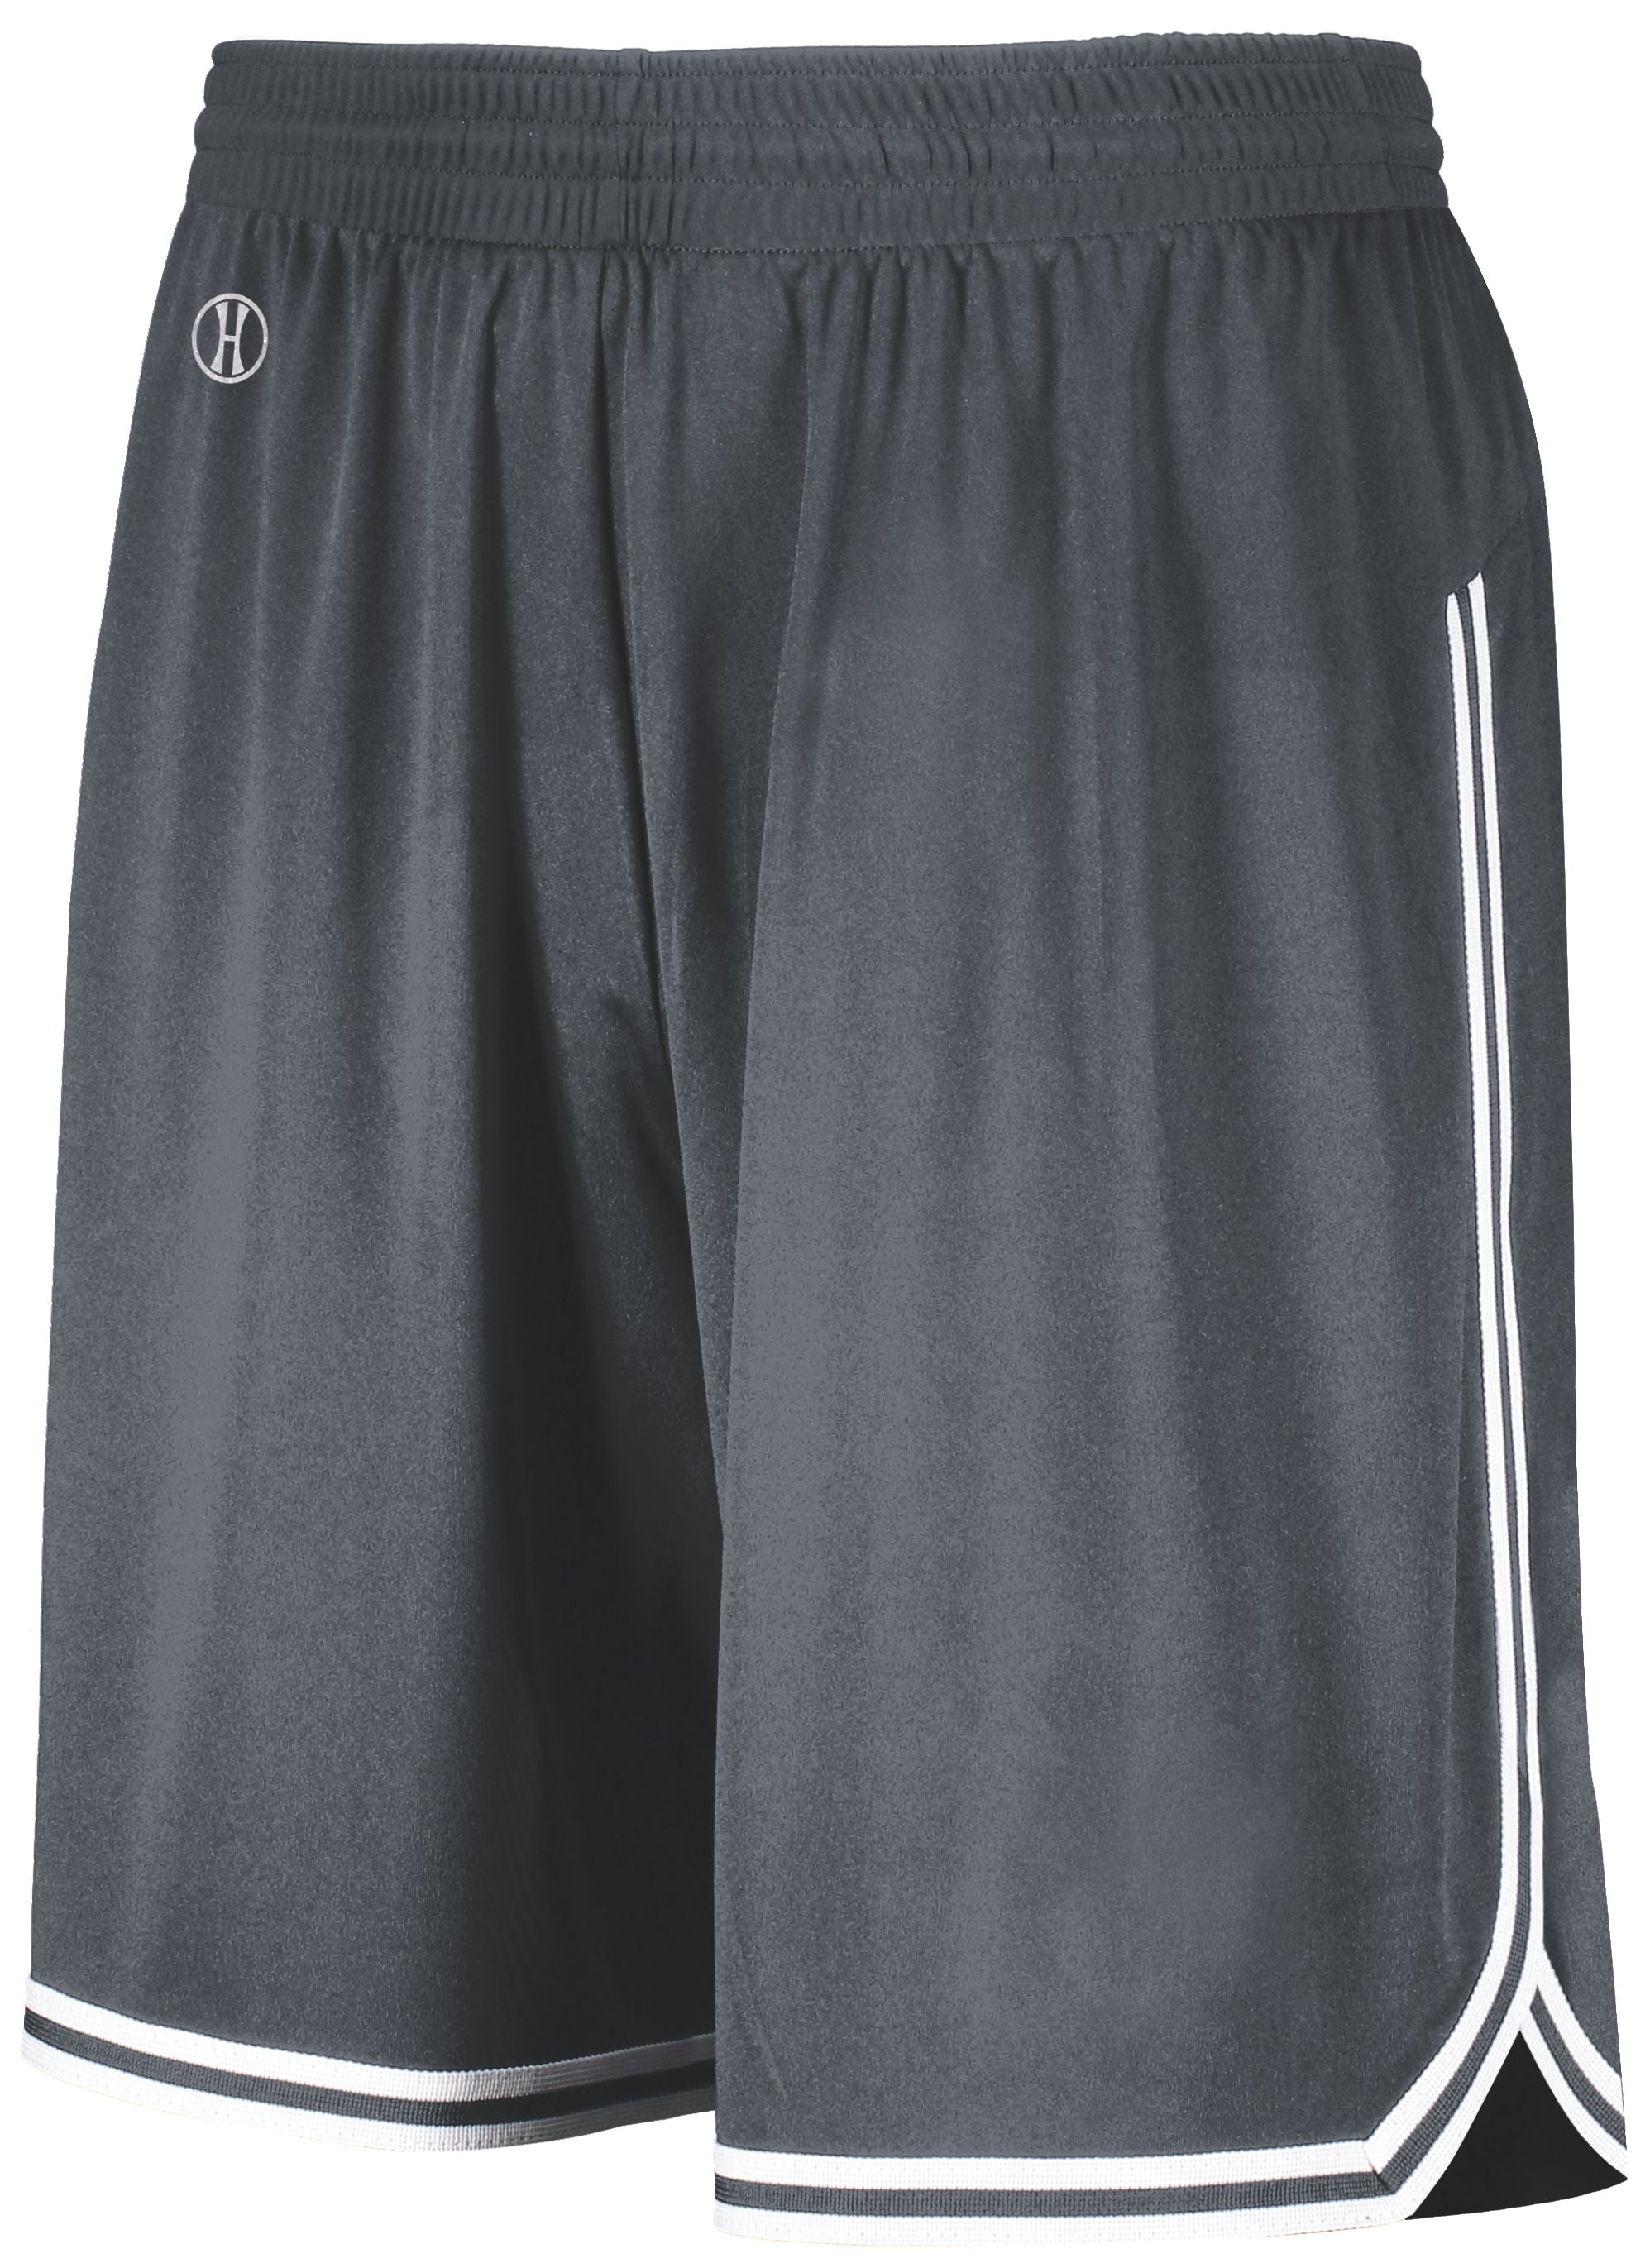 Holloway Retro Basketball Shorts in Graphite/White  -Part of the Adult, Adult-Shorts, Basketball, Holloway, All-Sports, All-Sports-1 product lines at KanaleyCreations.com